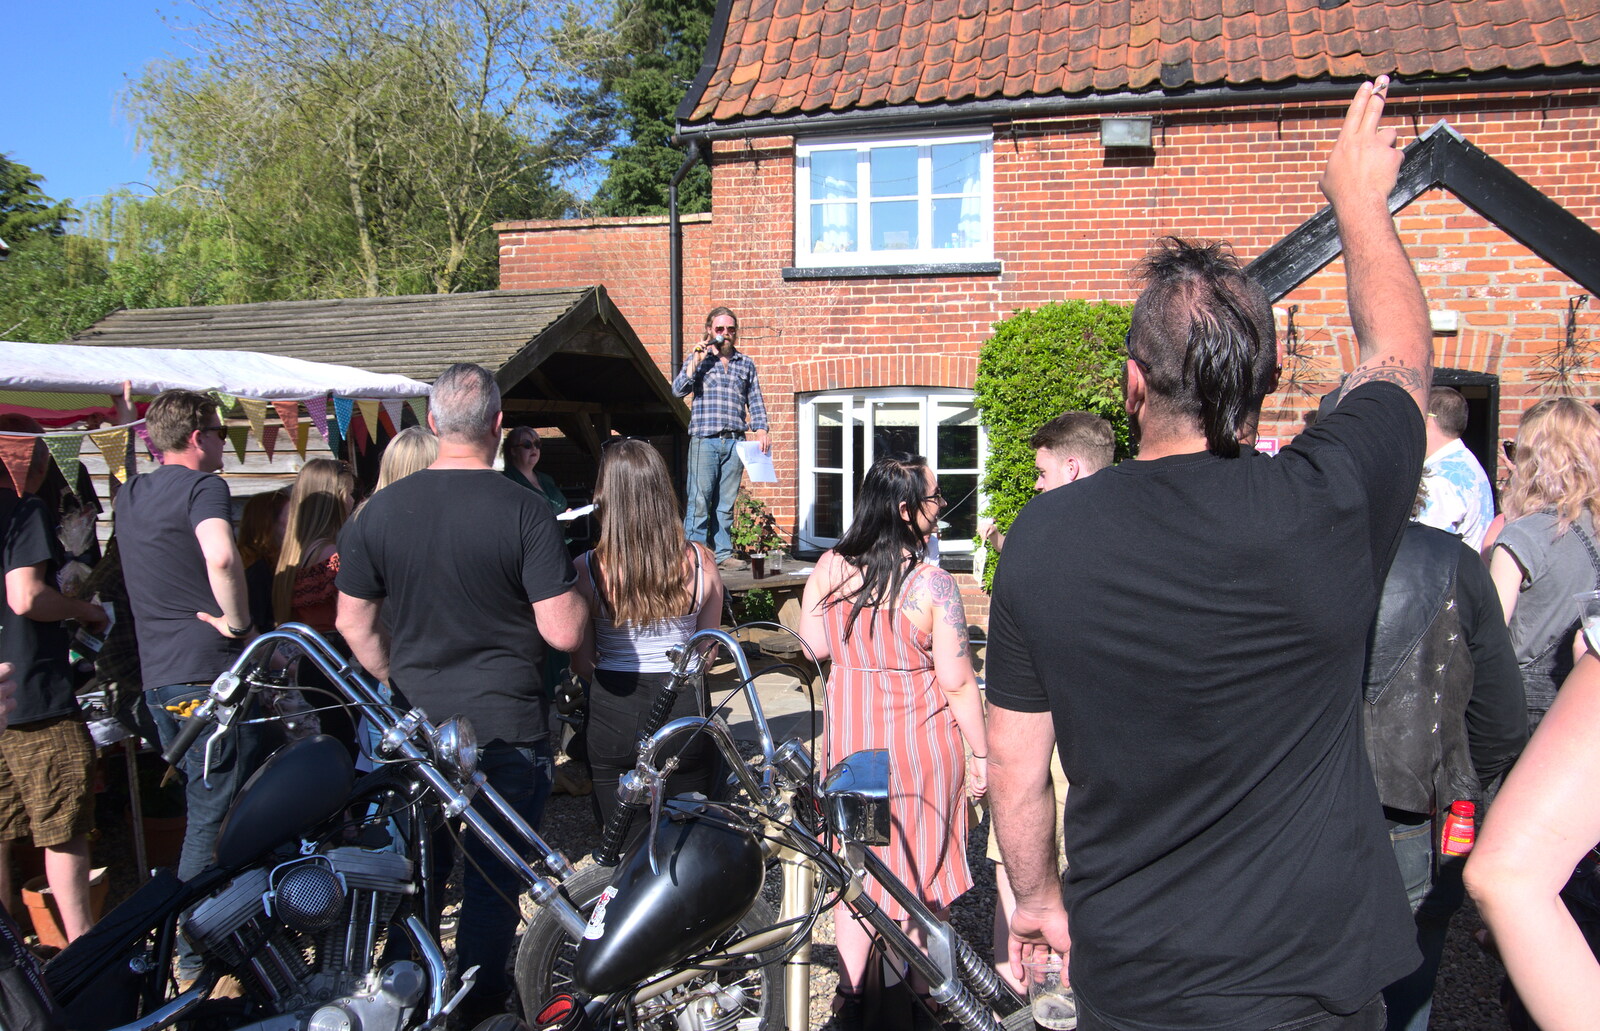 An auction takes place from Beer, Bikes and Bands, Burston Crown, Burston, Norfolk - 6th May 2018